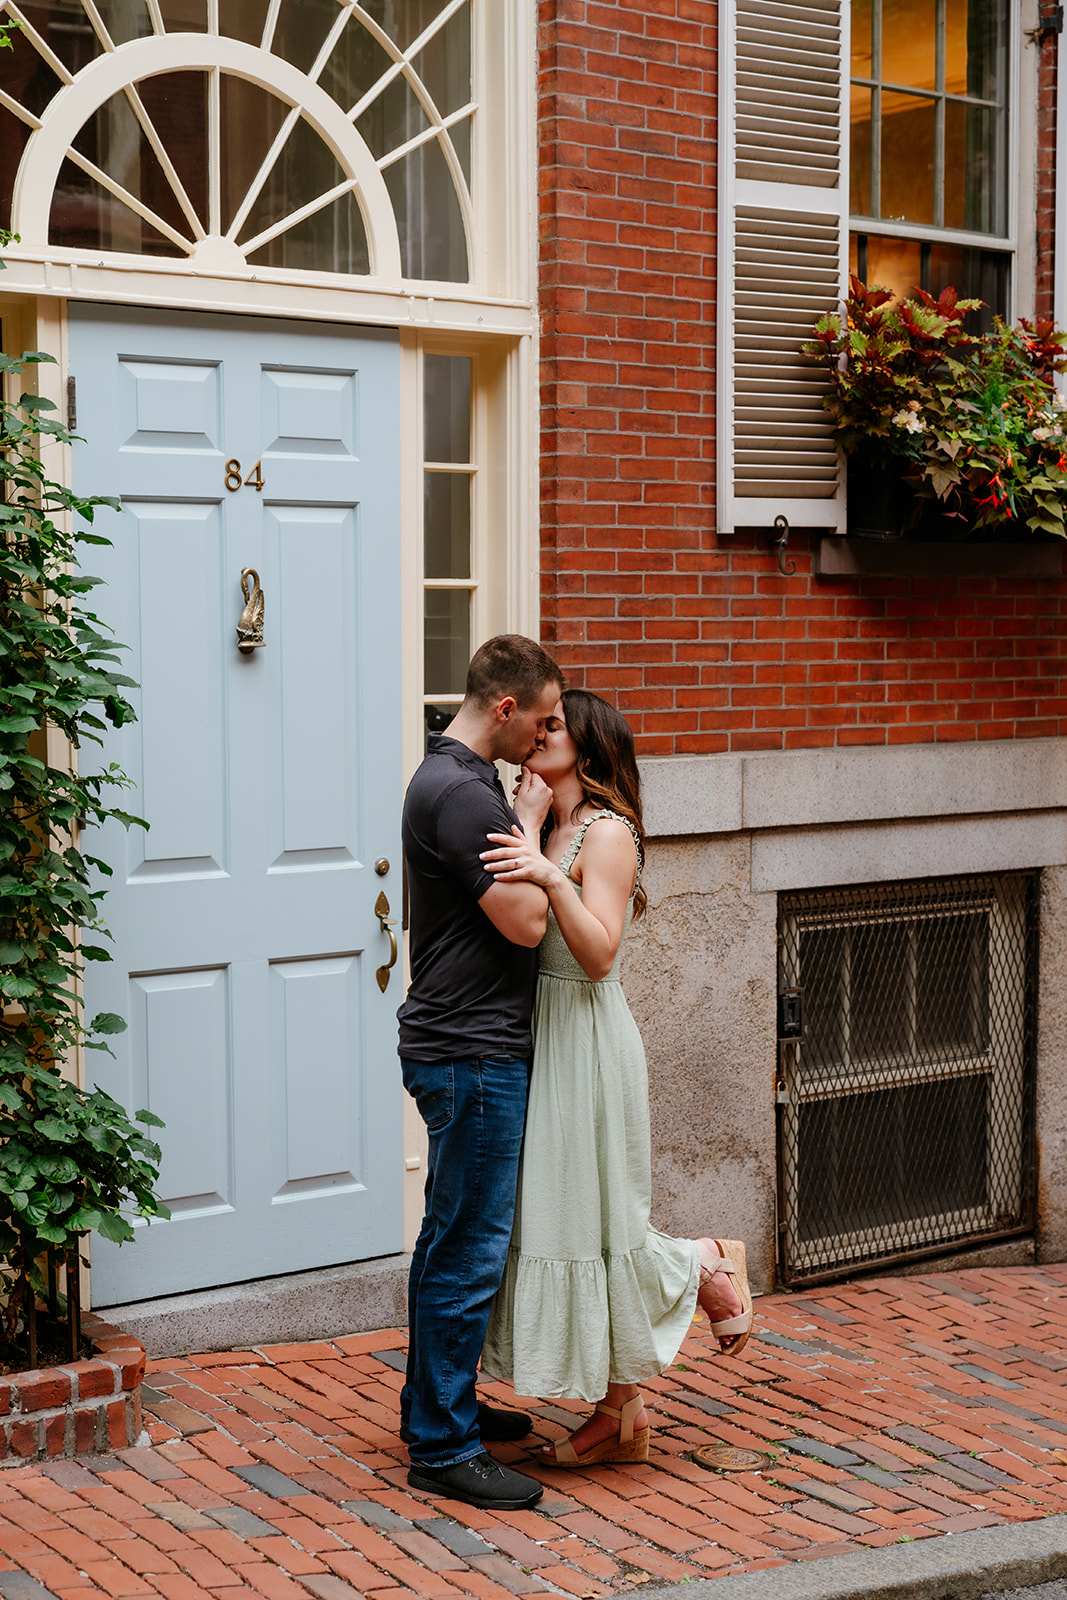 A couple embracing and kissing on a quaint city street with brick buildings and a blue door on the streets of Beacon Hill as they take Boston engagement photos